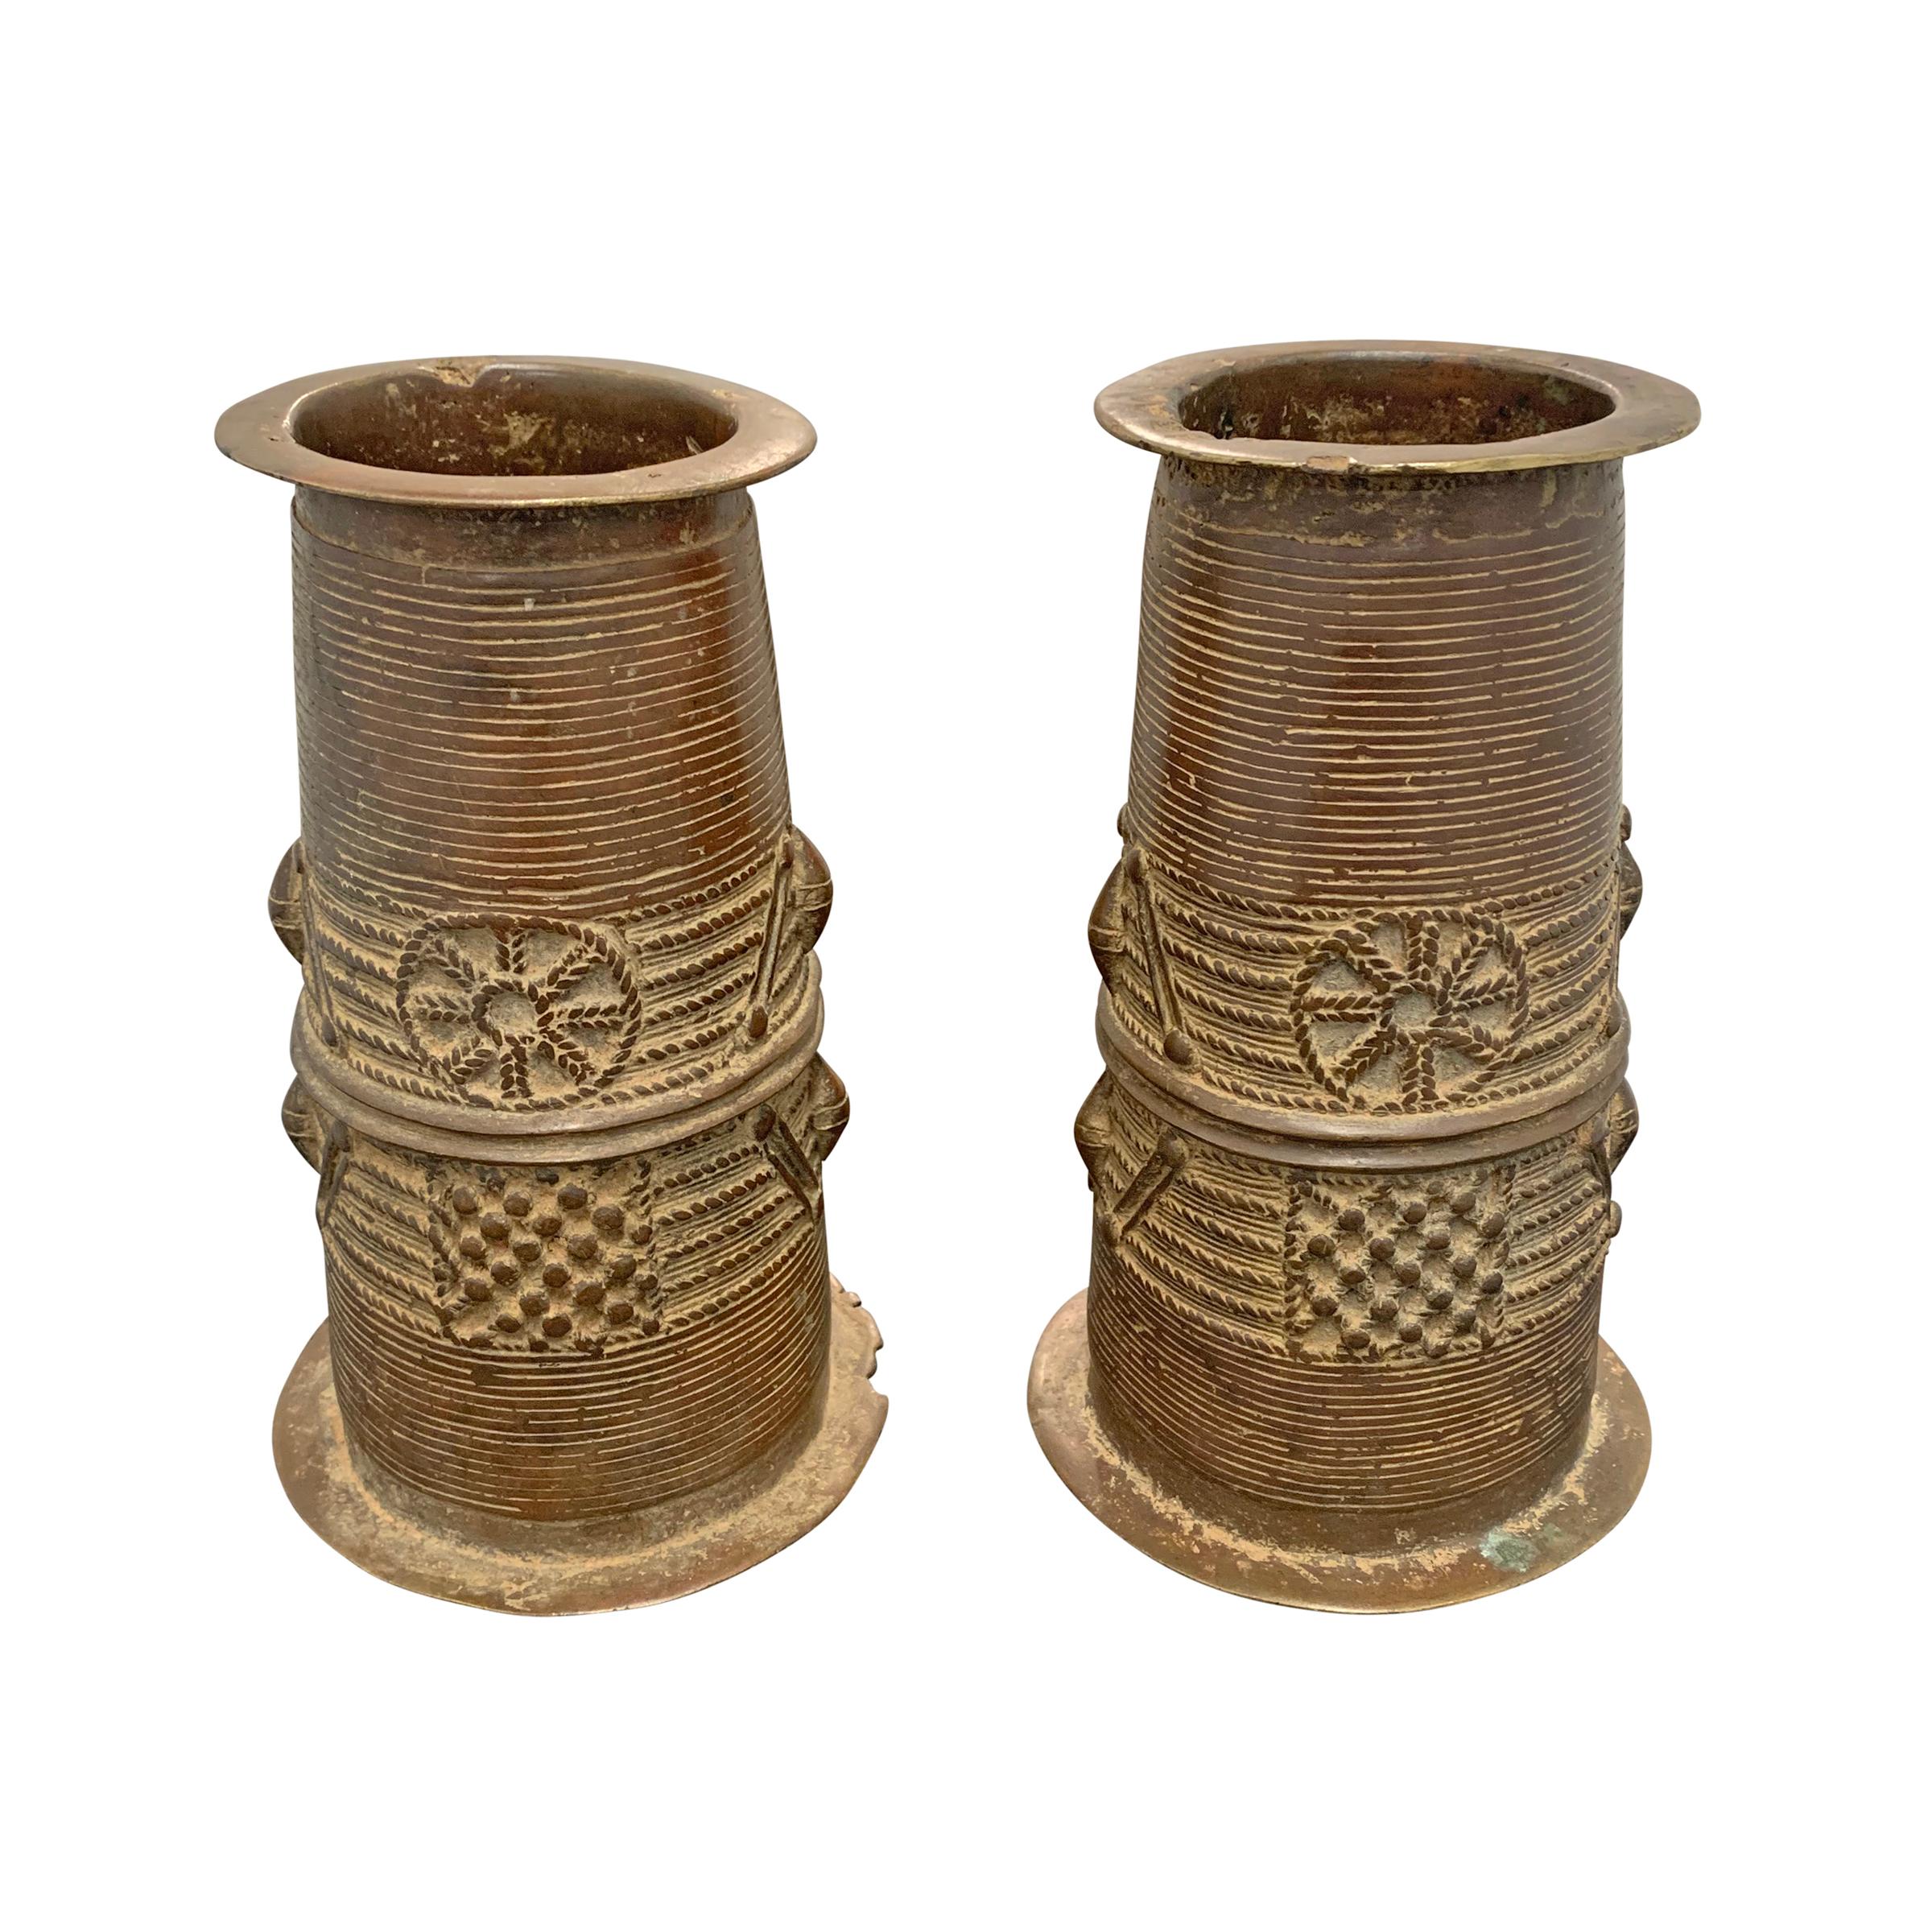 Tribal Pair of 19th Century Copper Currency Cuffs